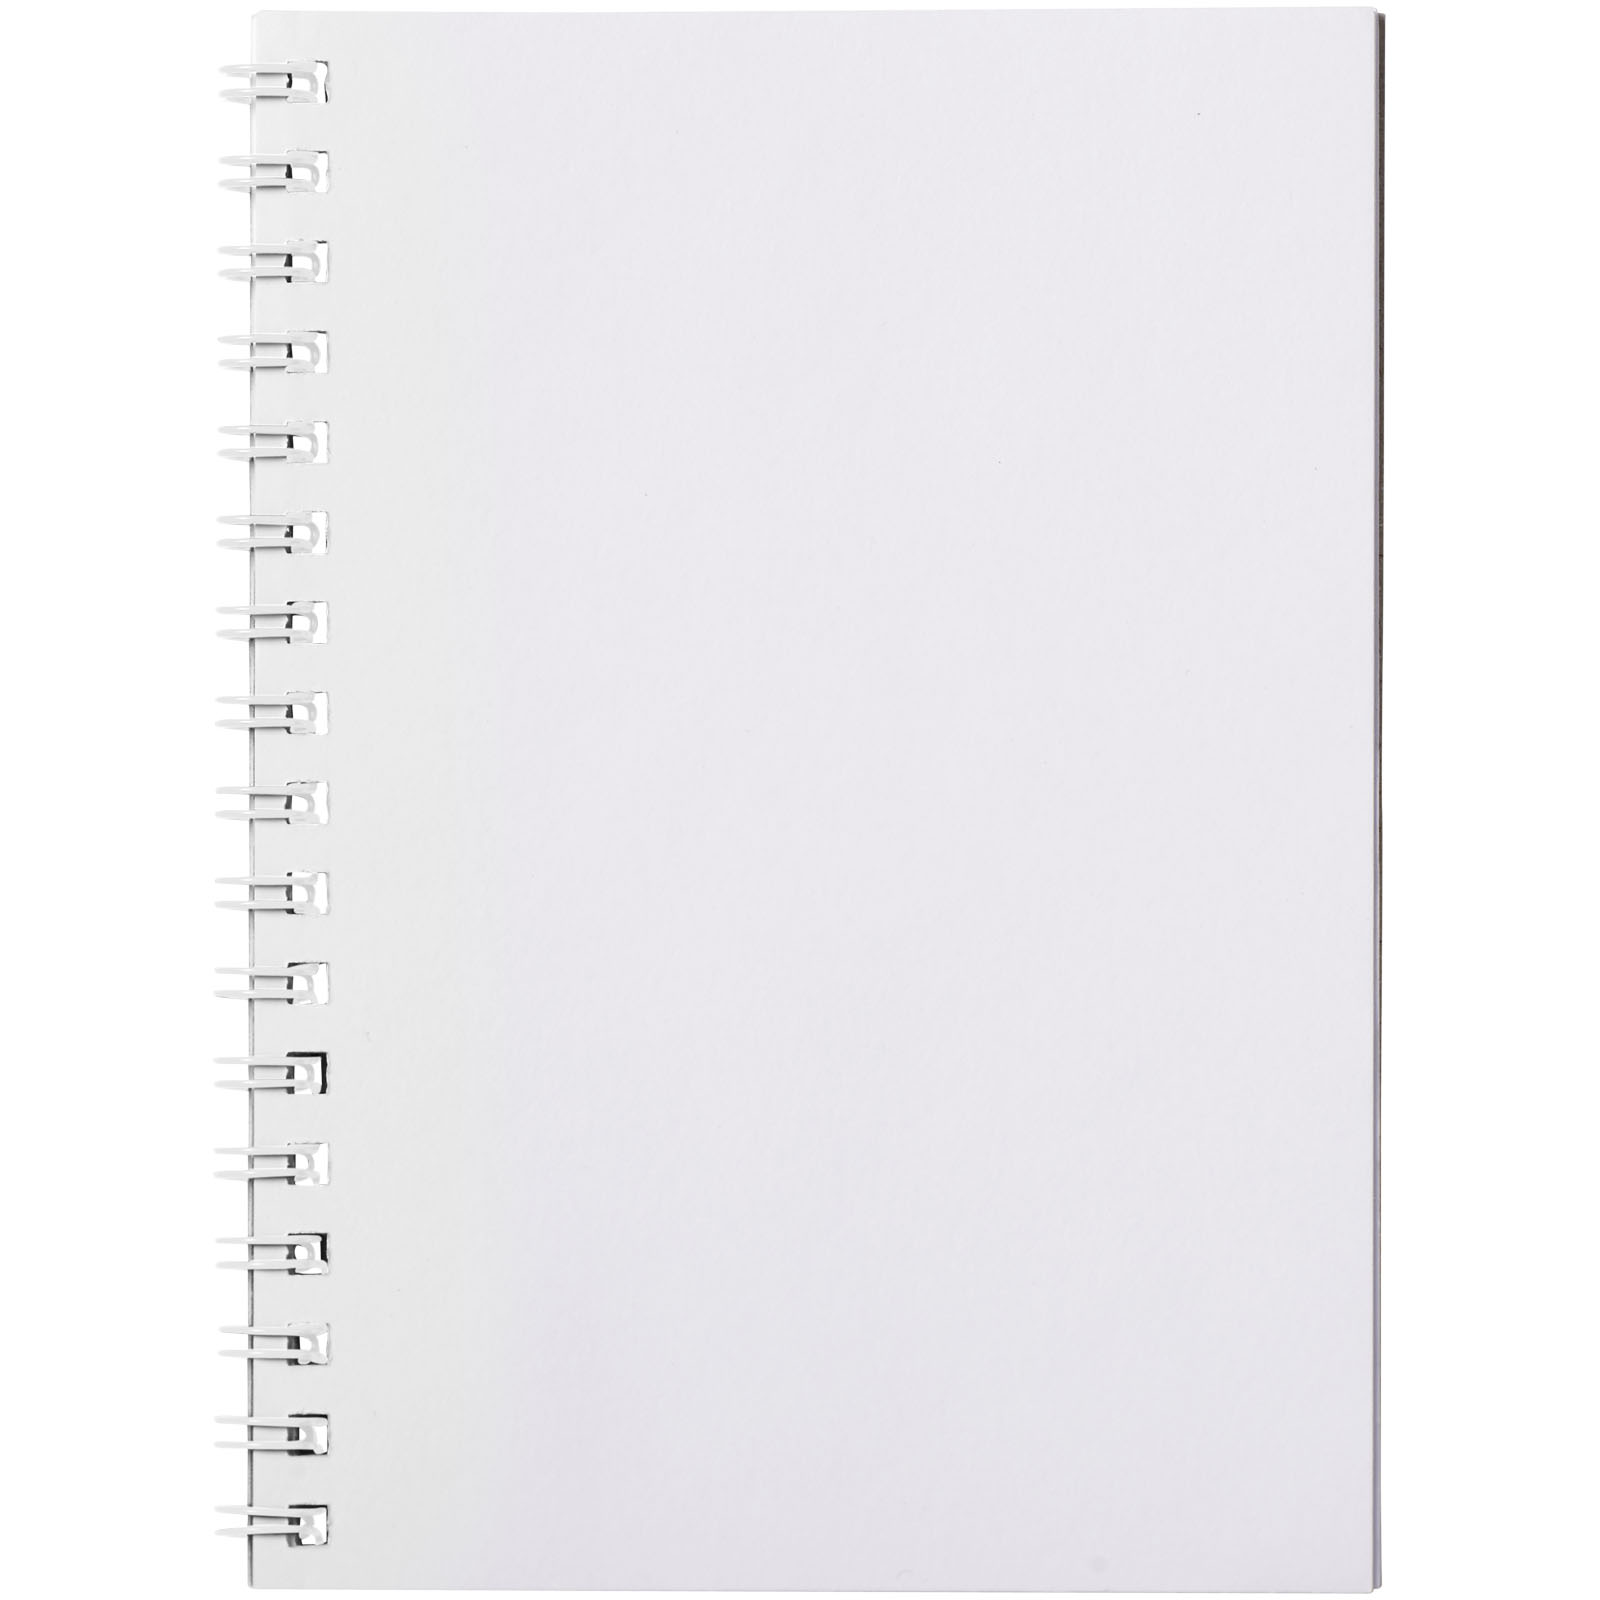 Advertising Notebooks - Desk-Mate® spiral A6 notebook PP cover - 1